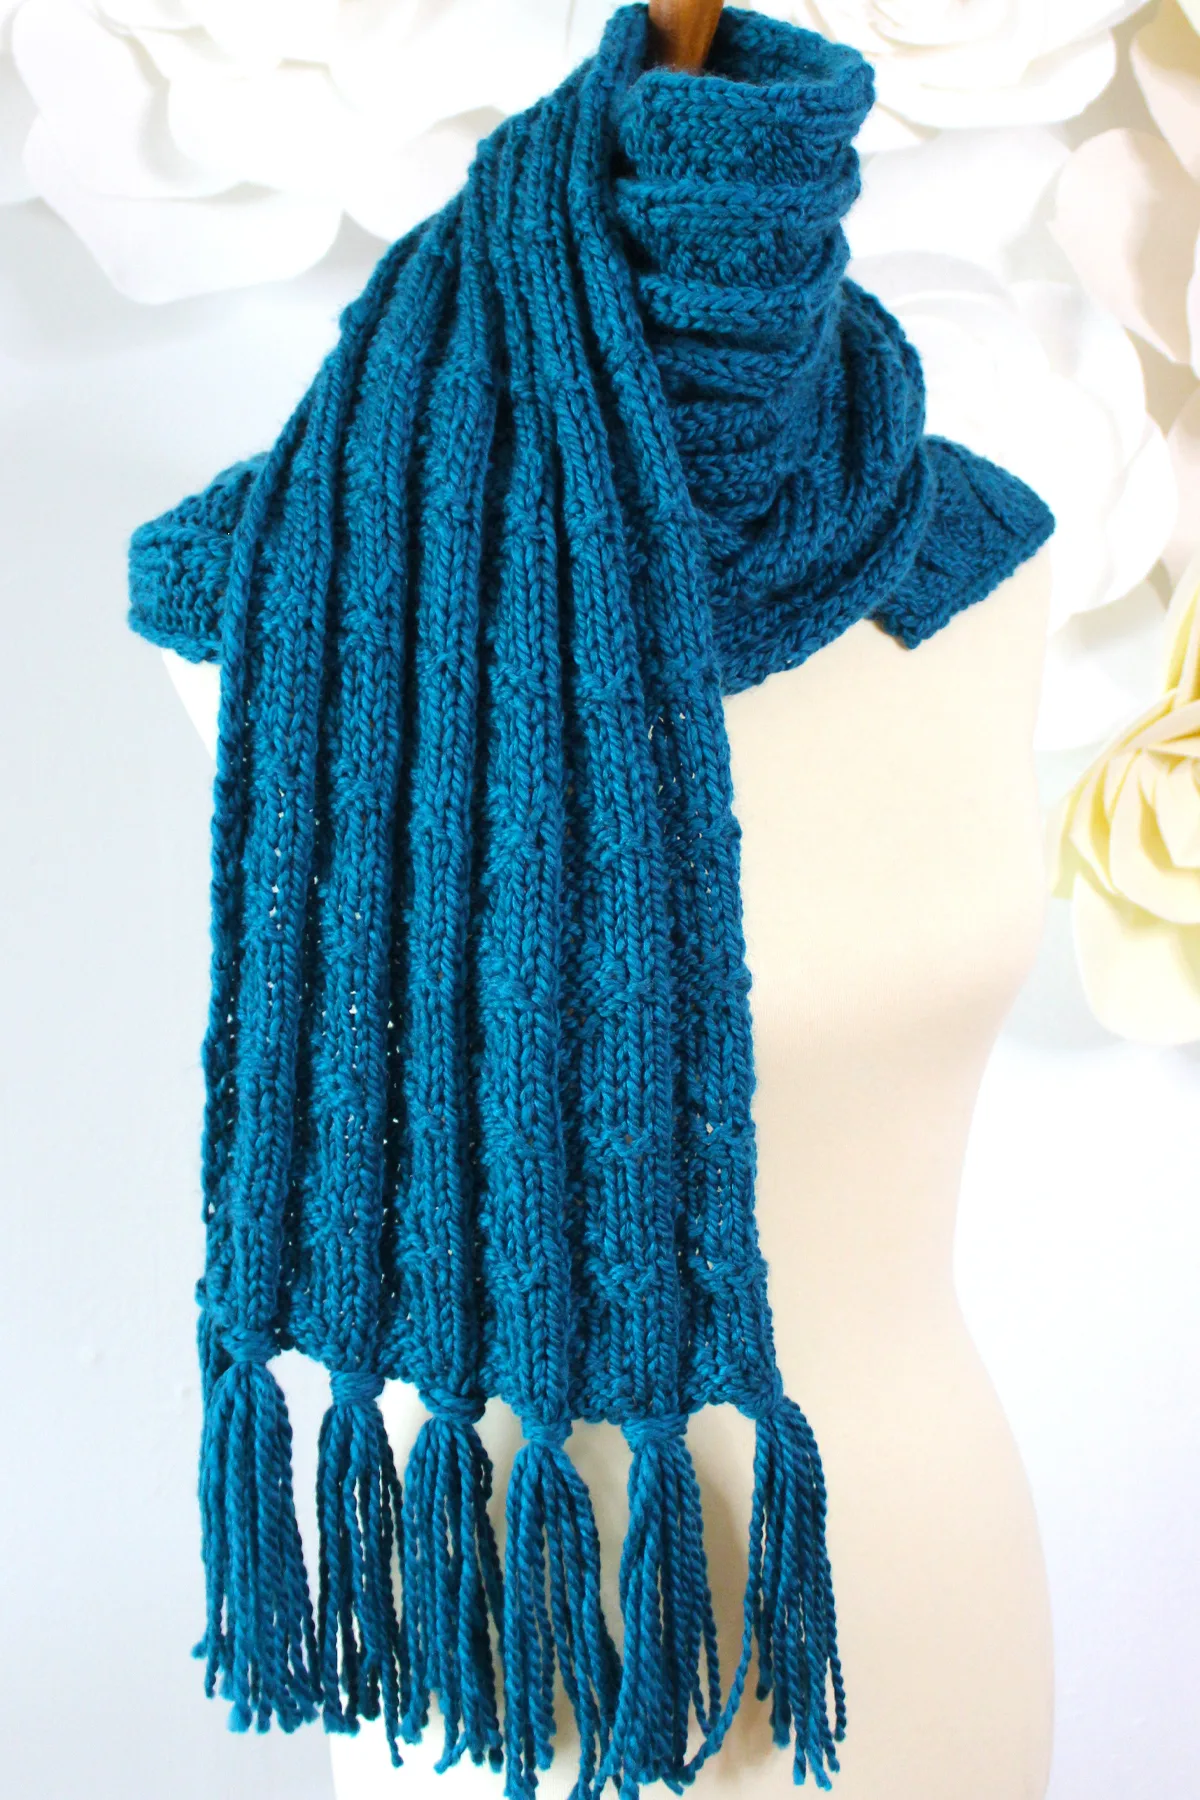 Pennant Pleating knitted scarf with fringe wrapped in blue color yarn.